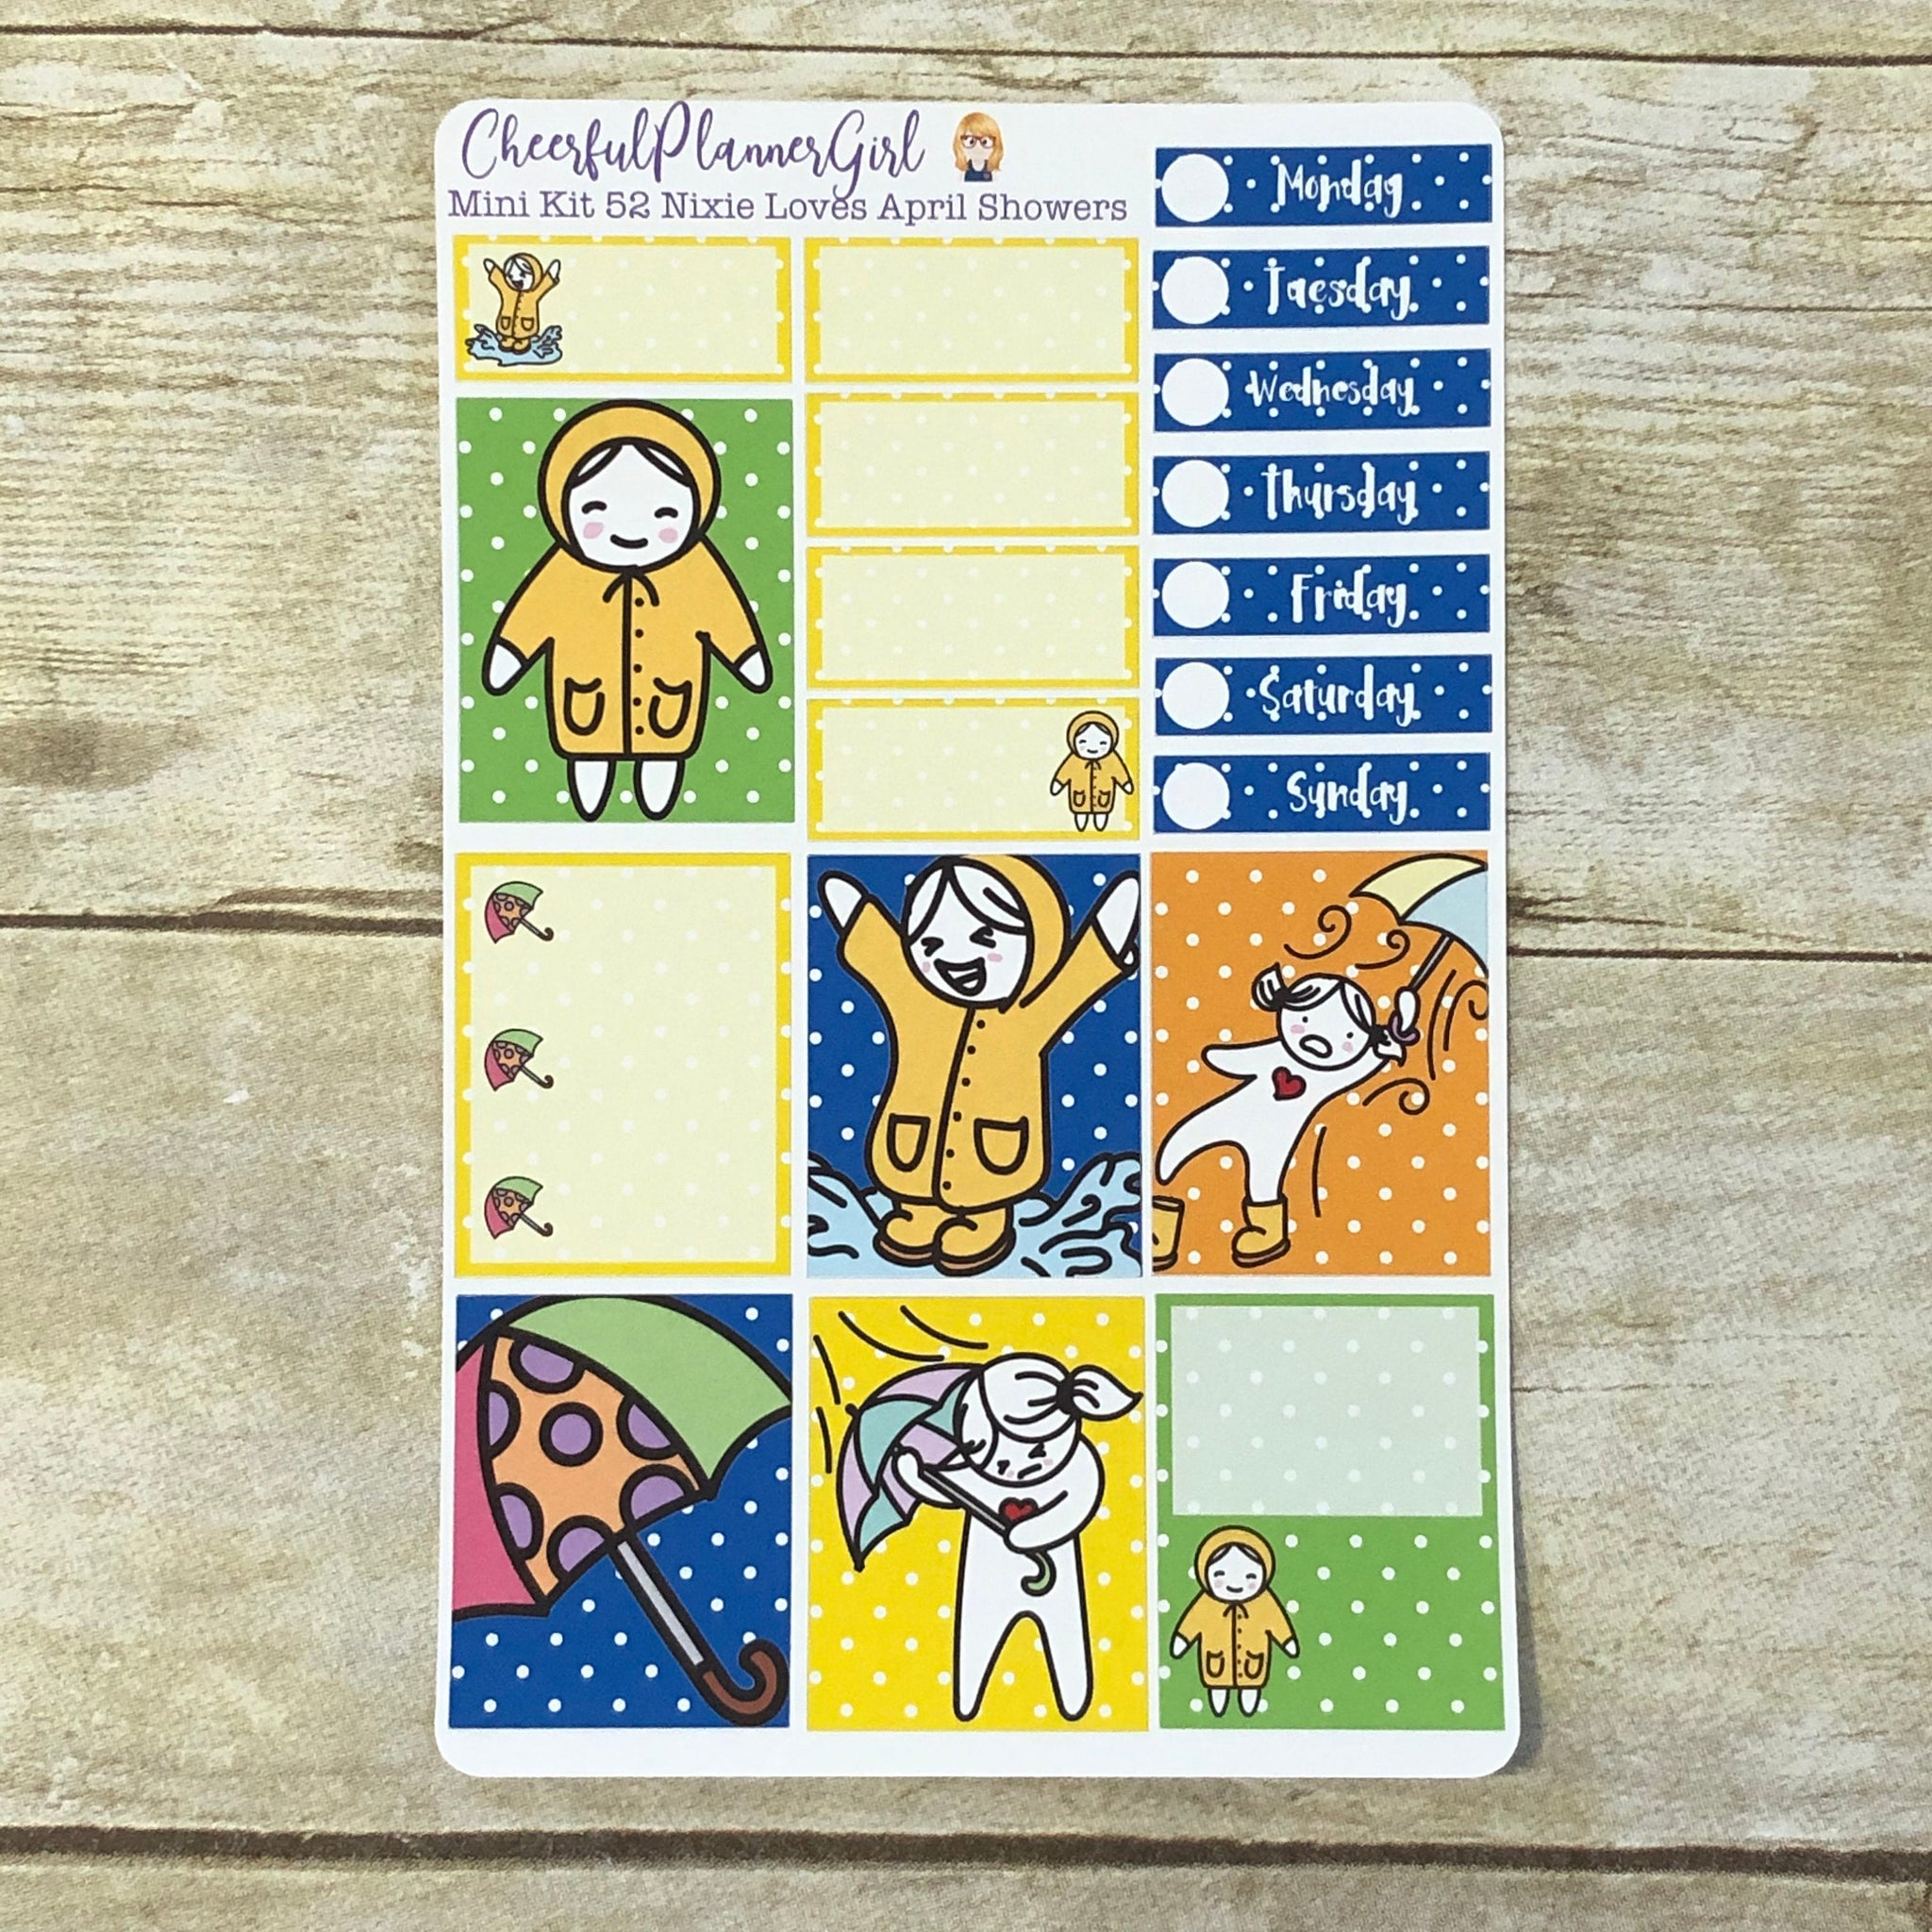 Nixie Loves April Showers Mini Kit Weekly Layout Planner Stickers